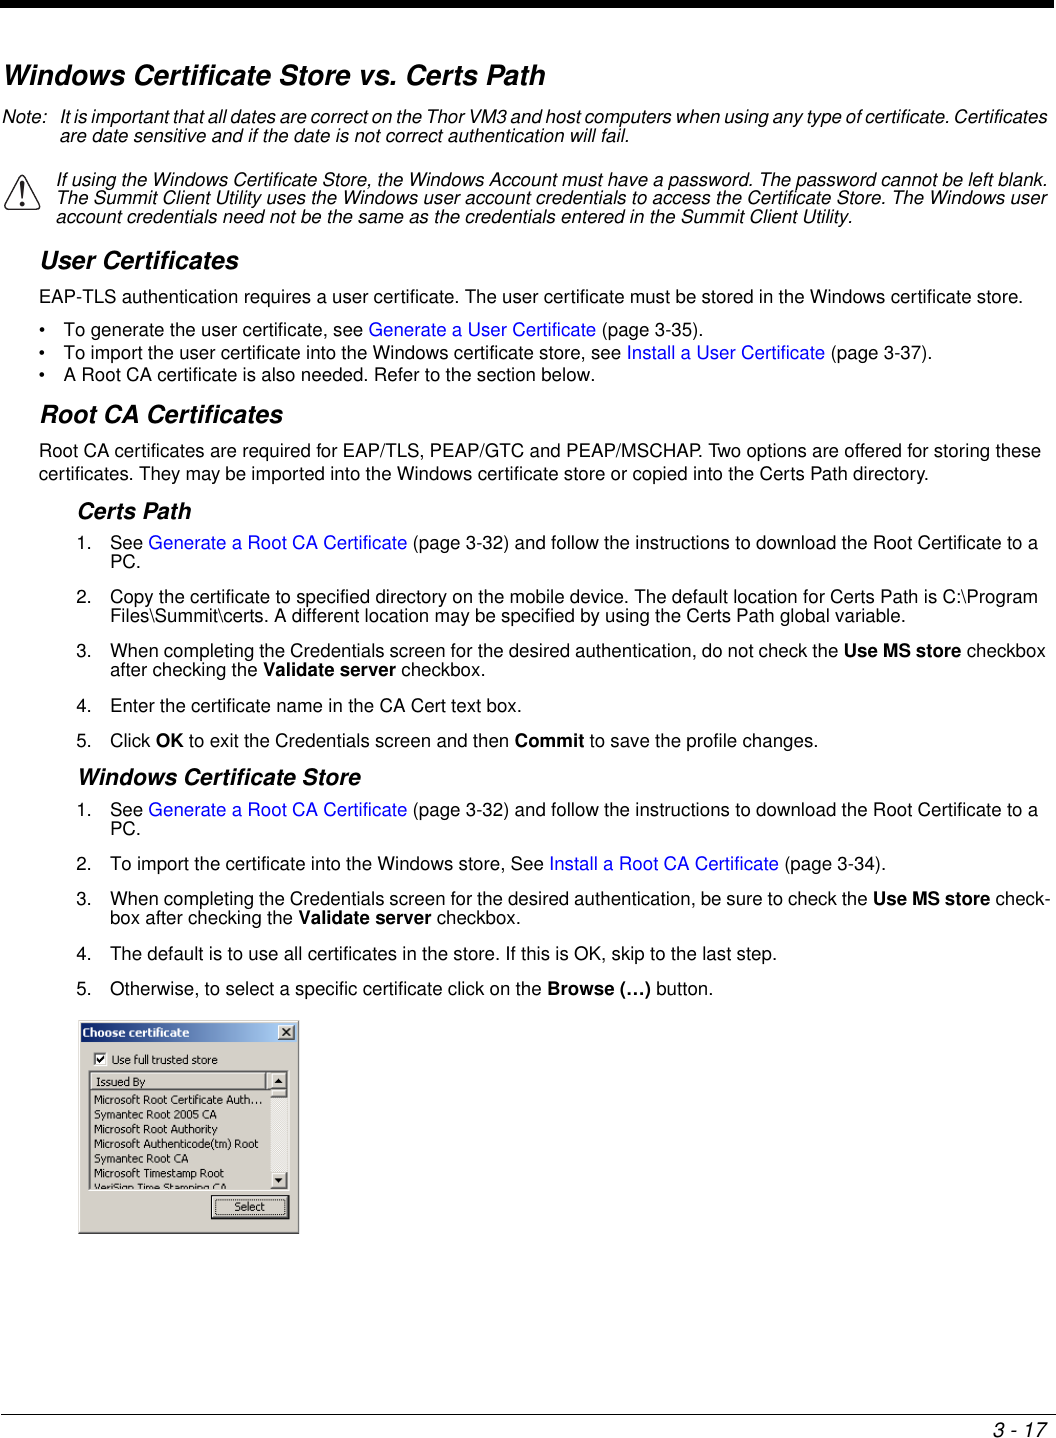 3 - 17Windows Certificate Store vs. Certs PathNote: It is important that all dates are correct on the Thor VM3 and host computers when using any type of certificate. Certificates are date sensitive and if the date is not correct authentication will fail.User CertificatesEAP-TLS authentication requires a user certificate. The user certificate must be stored in the Windows certificate store.• To generate the user certificate, see Generate a User Certificate (page 3-35).• To import the user certificate into the Windows certificate store, see Install a User Certificate (page 3-37).• A Root CA certificate is also needed. Refer to the section below.Root CA CertificatesRoot CA certificates are required for EAP/TLS, PEAP/GTC and PEAP/MSCHAP. Two options are offered for storing these certificates. They may be imported into the Windows certificate store or copied into the Certs Path directory.Certs Path1. See Generate a Root CA Certificate (page 3-32) and follow the instructions to download the Root Certificate to a PC.2. Copy the certificate to specified directory on the mobile device. The default location for Certs Path is C:\Program Files\Summit\certs. A different location may be specified by using the Certs Path global variable. 3. When completing the Credentials screen for the desired authentication, do not check the Use MS store checkbox after checking the Validate server checkbox.4. Enter the certificate name in the CA Cert text box.5. Click OK to exit the Credentials screen and then Commit to save the profile changes.Windows Certificate Store1. See Generate a Root CA Certificate (page 3-32) and follow the instructions to download the Root Certificate to a PC.2. To import the certificate into the Windows store, See Install a Root CA Certificate (page 3-34).3. When completing the Credentials screen for the desired authentication, be sure to check the Use MS store check-box after checking the Validate server checkbox.4. The default is to use all certificates in the store. If this is OK, skip to the last step.5. Otherwise, to select a specific certificate click on the Browse (…) button. If using the Windows Certificate Store, the Windows Account must have a password. The password cannot be left blank. The Summit Client Utility uses the Windows user account credentials to access the Certificate Store. The Windows user account credentials need not be the same as the credentials entered in the Summit Client Utility.!